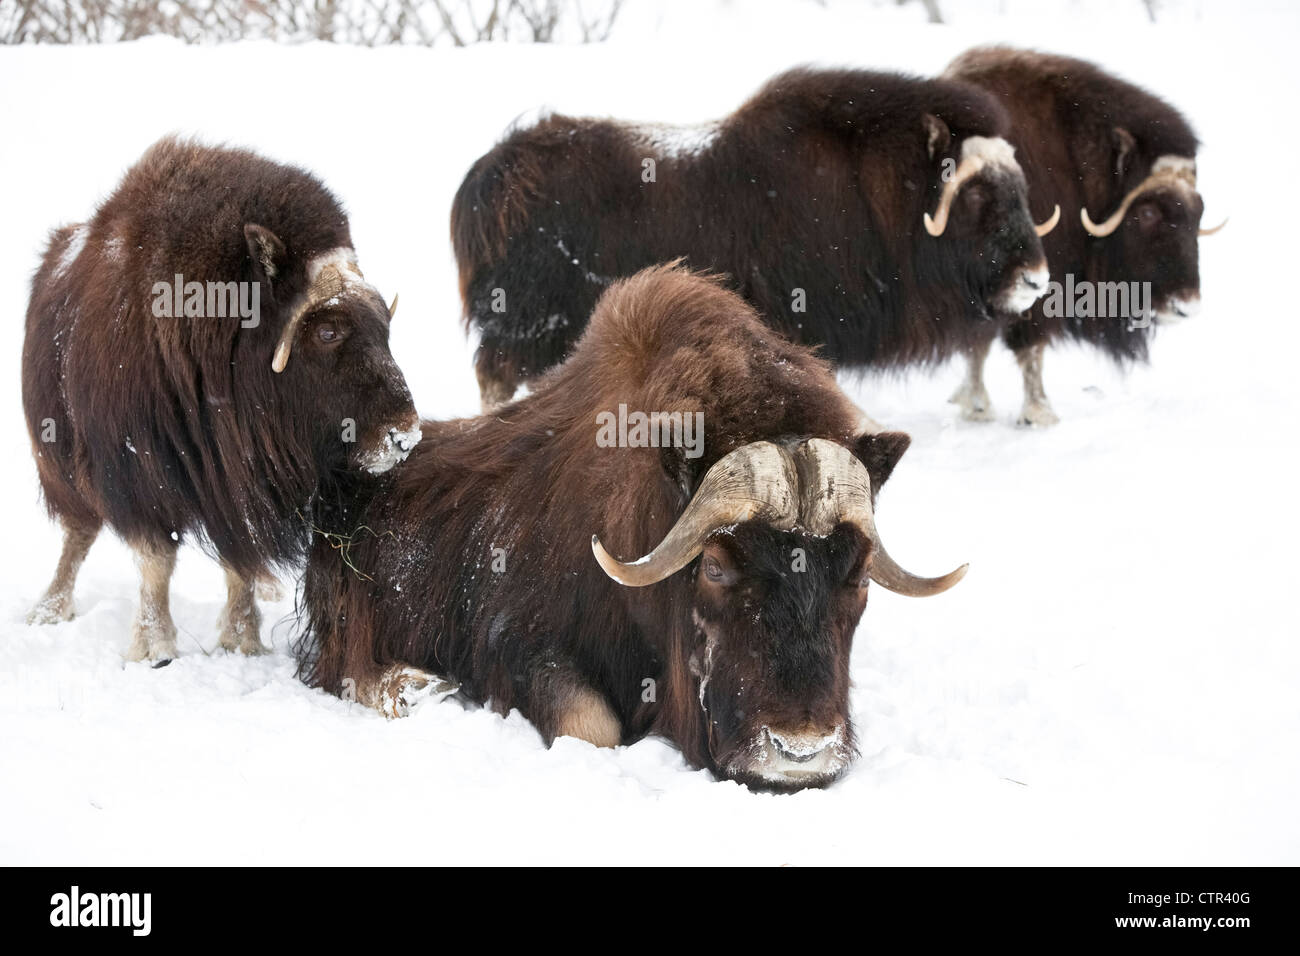 CAPTIVE: Three cow one bull Musk Ox stand in deep snow during winter storm Alaska Wildlife Conservation Center Southcentral Stock Photo